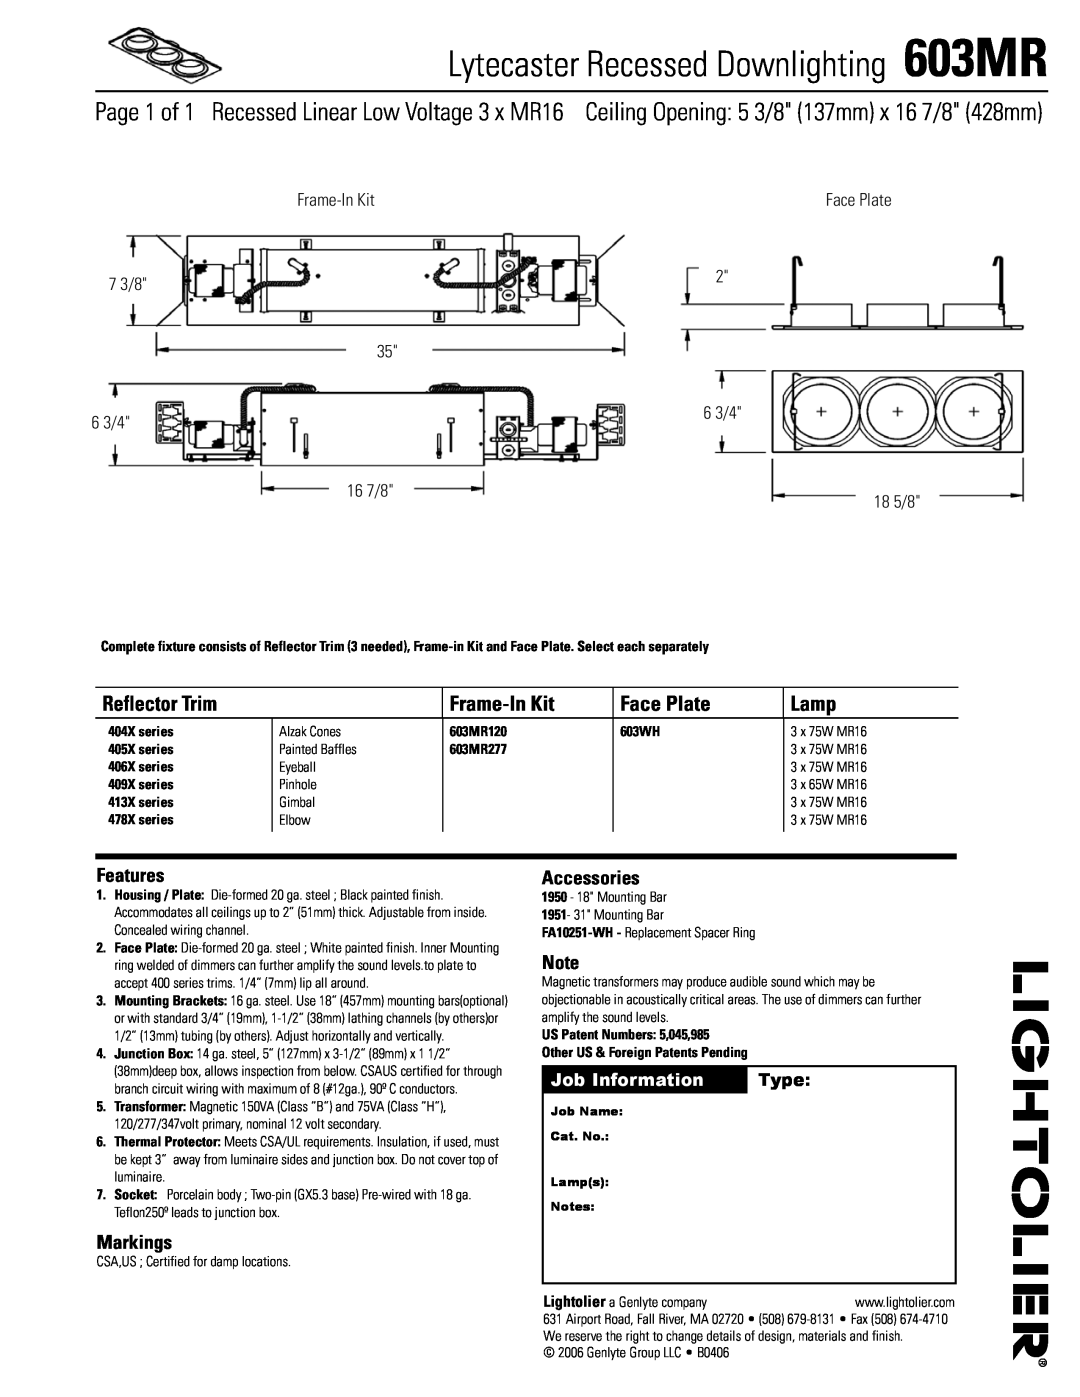 Lightolier manual Lytecaster Recessed Downlighting 603MR, Page 1 of 1 Recessed Linear Low Voltage 3 x MR16, Frame-InKit 